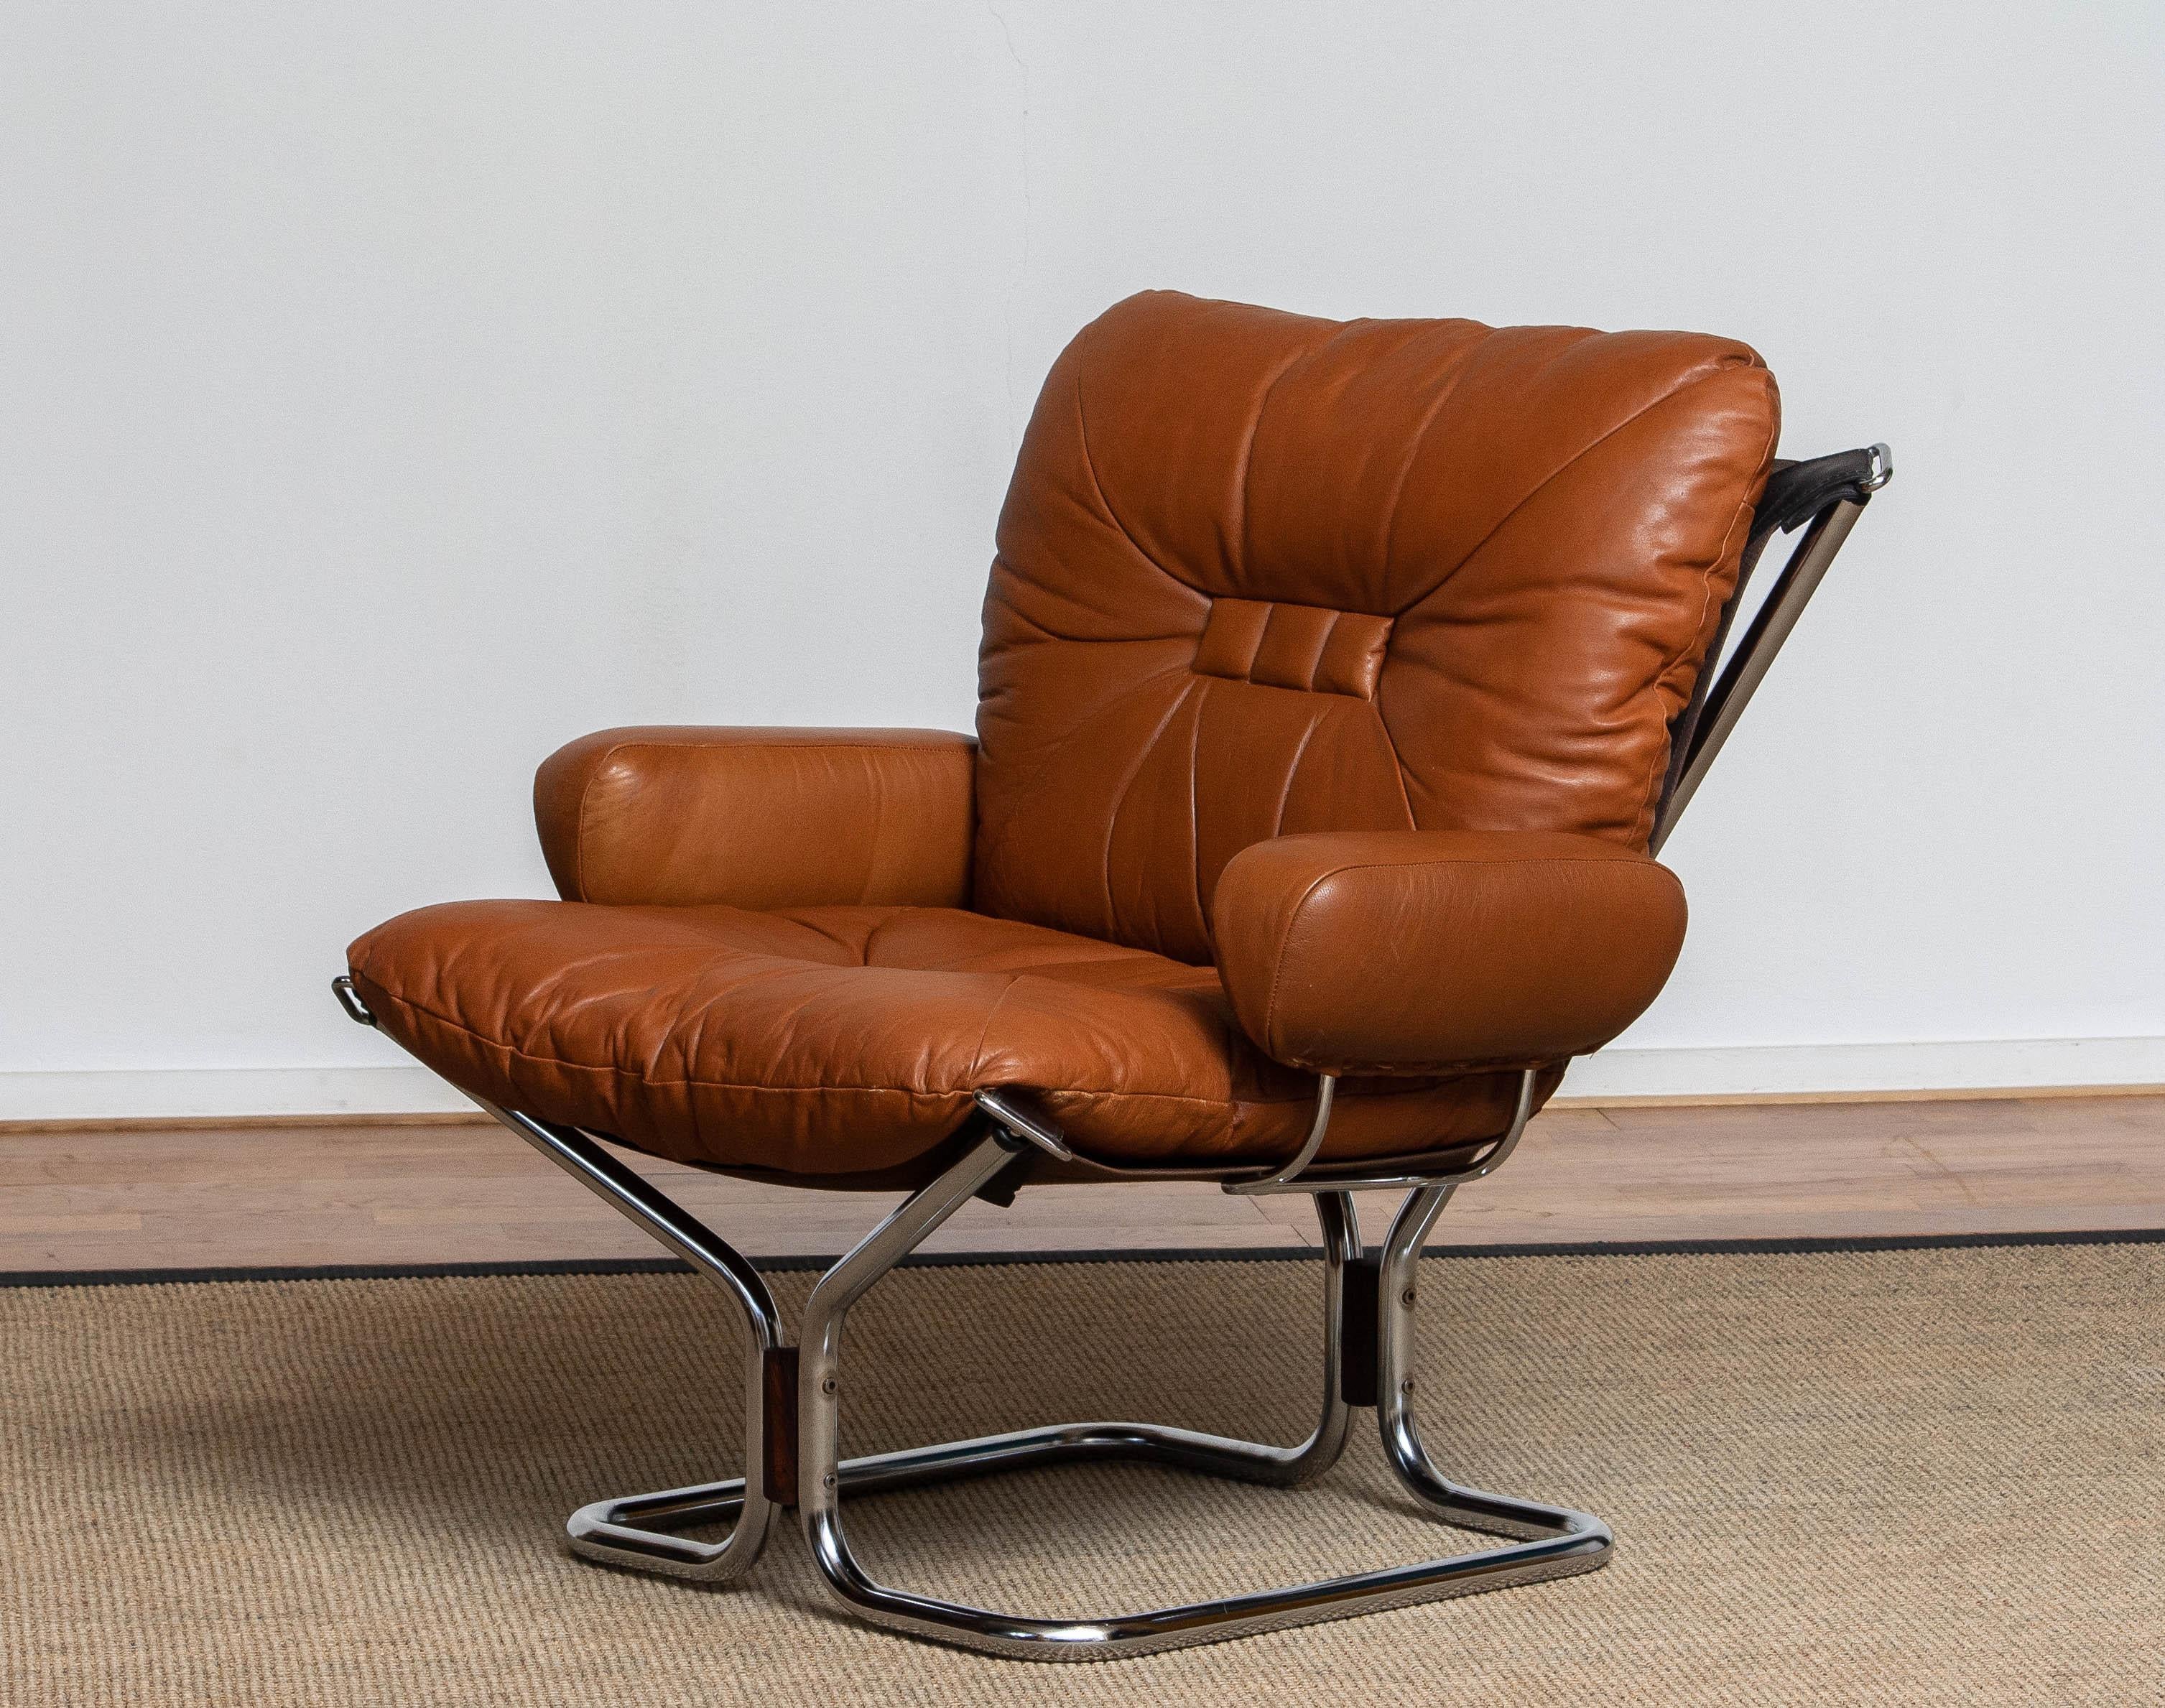 Scandinavian Modern 1970's Cognac Leather and Chrome Lounge Chair by Harald Relling for Westnofa